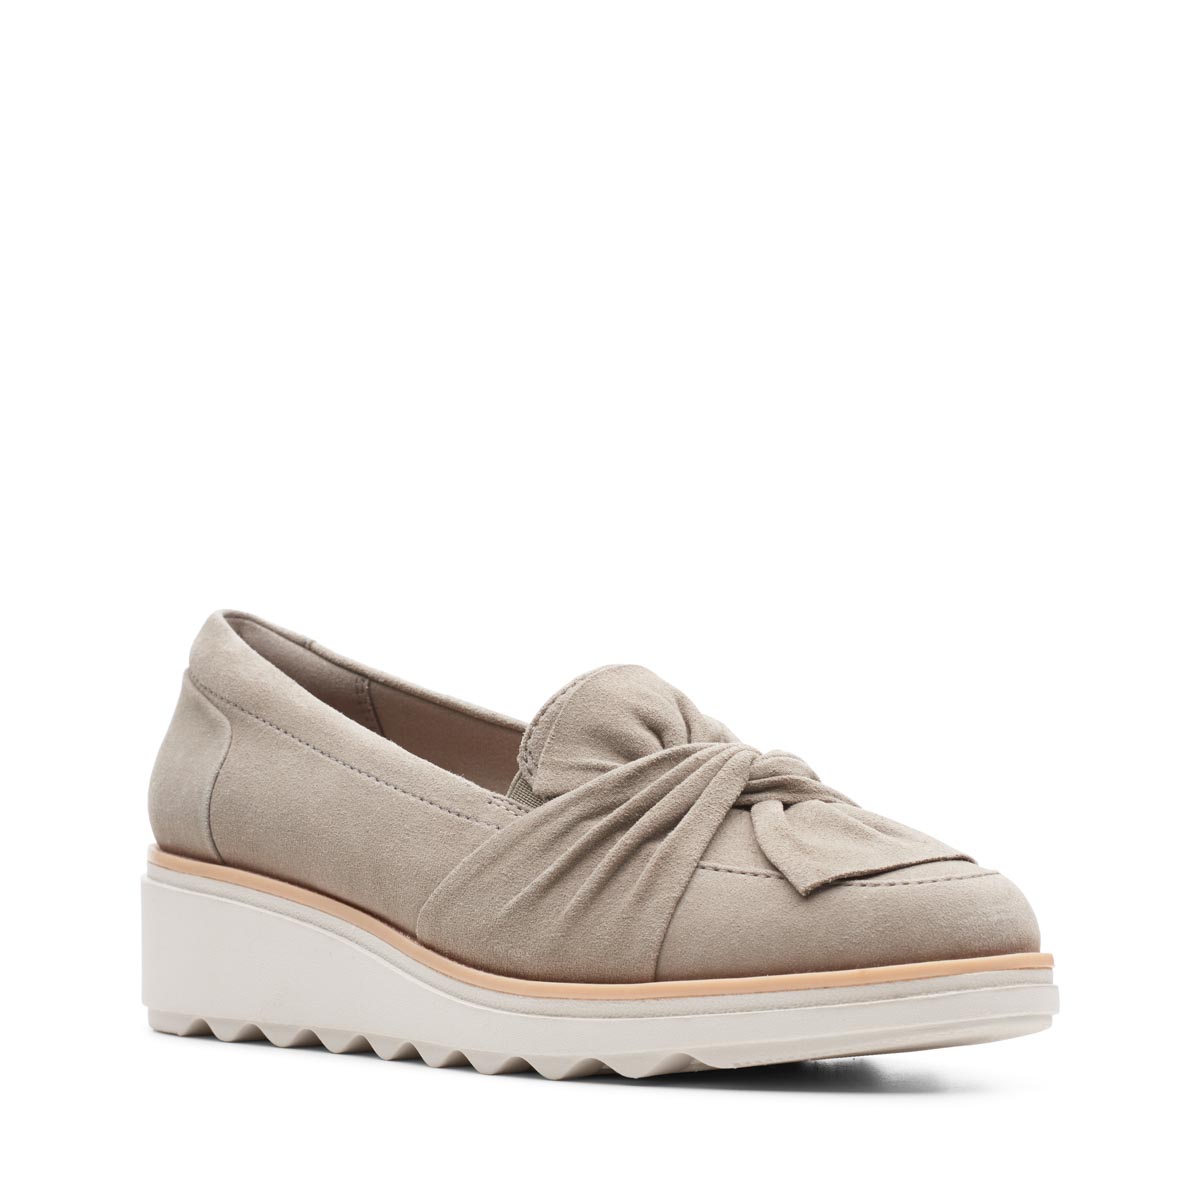 clarks wedge trainers